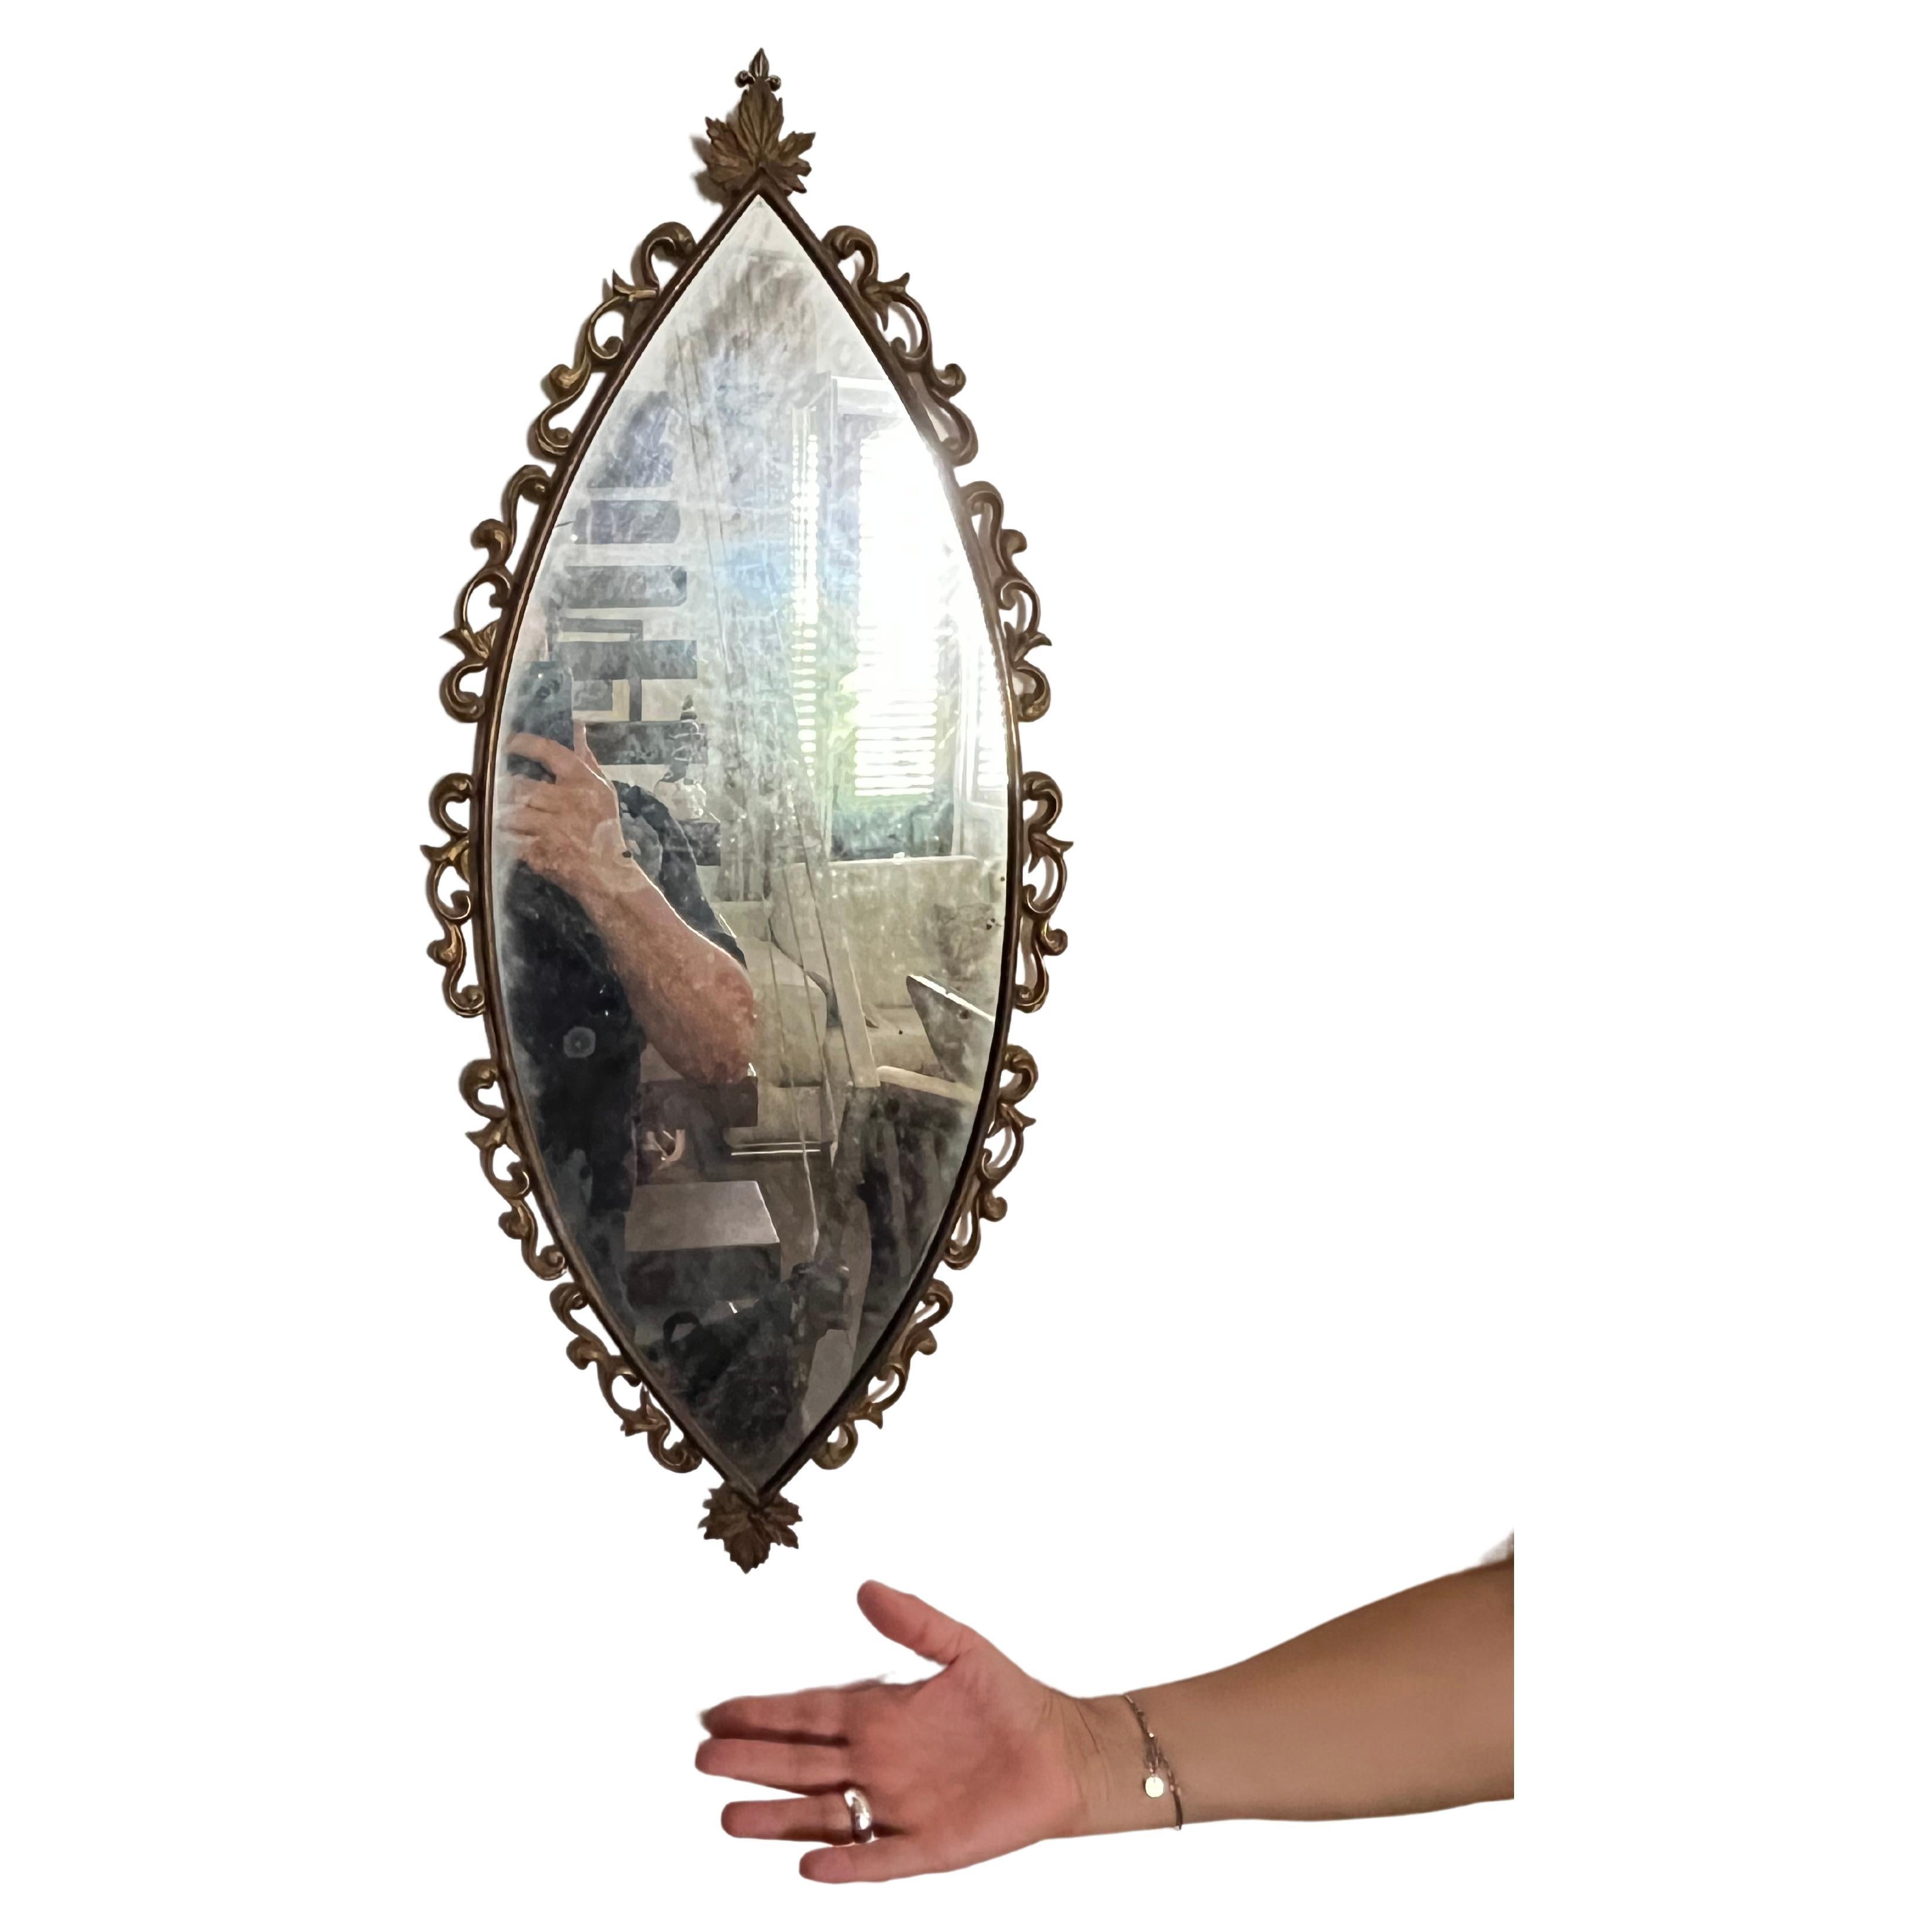 Bronze mirror, Italian production, 1950s
Found in a noble apartment, it is intact and in good condition. Small signs of the time.
The shape is very particular.

We guarantee adequate packaging and will ship via DHL, insuring the contents against any